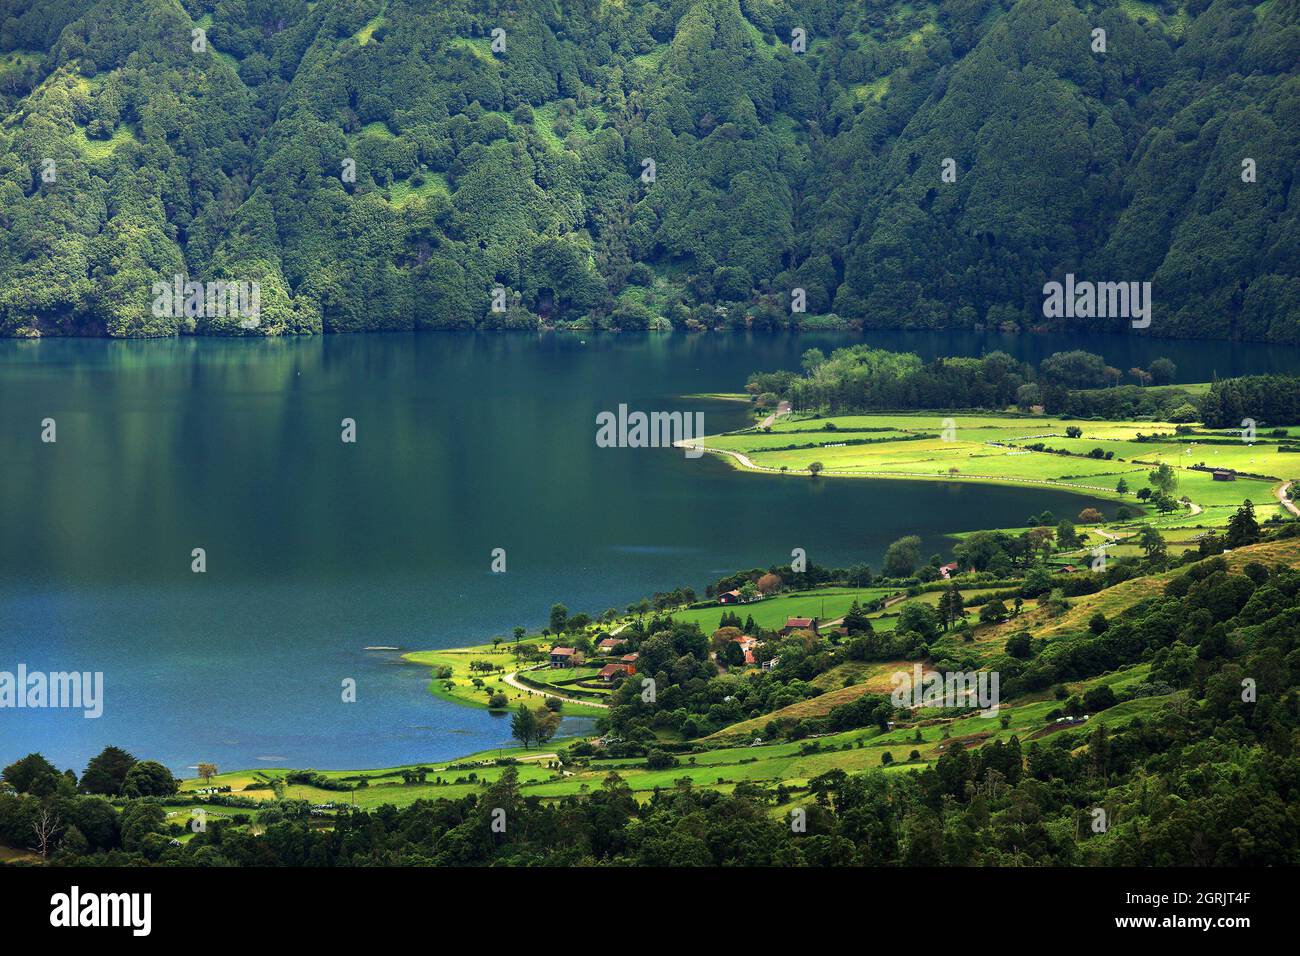 Scenic View Of Lake Against Trees Stock Photo